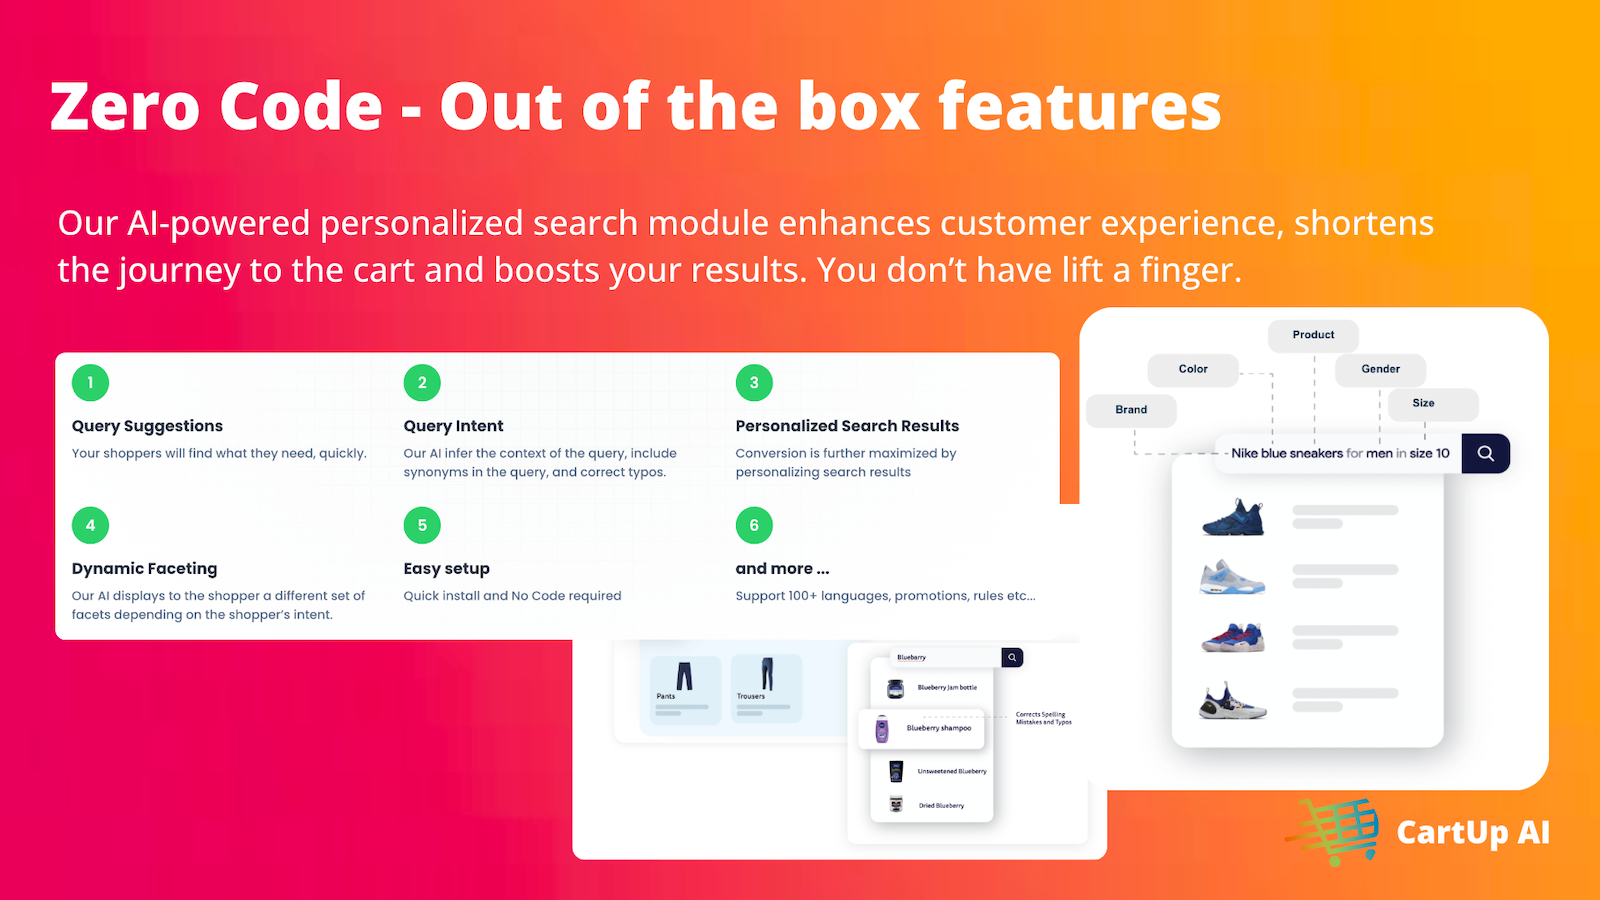 Shopify Search & Discovery: Customize your storefront search